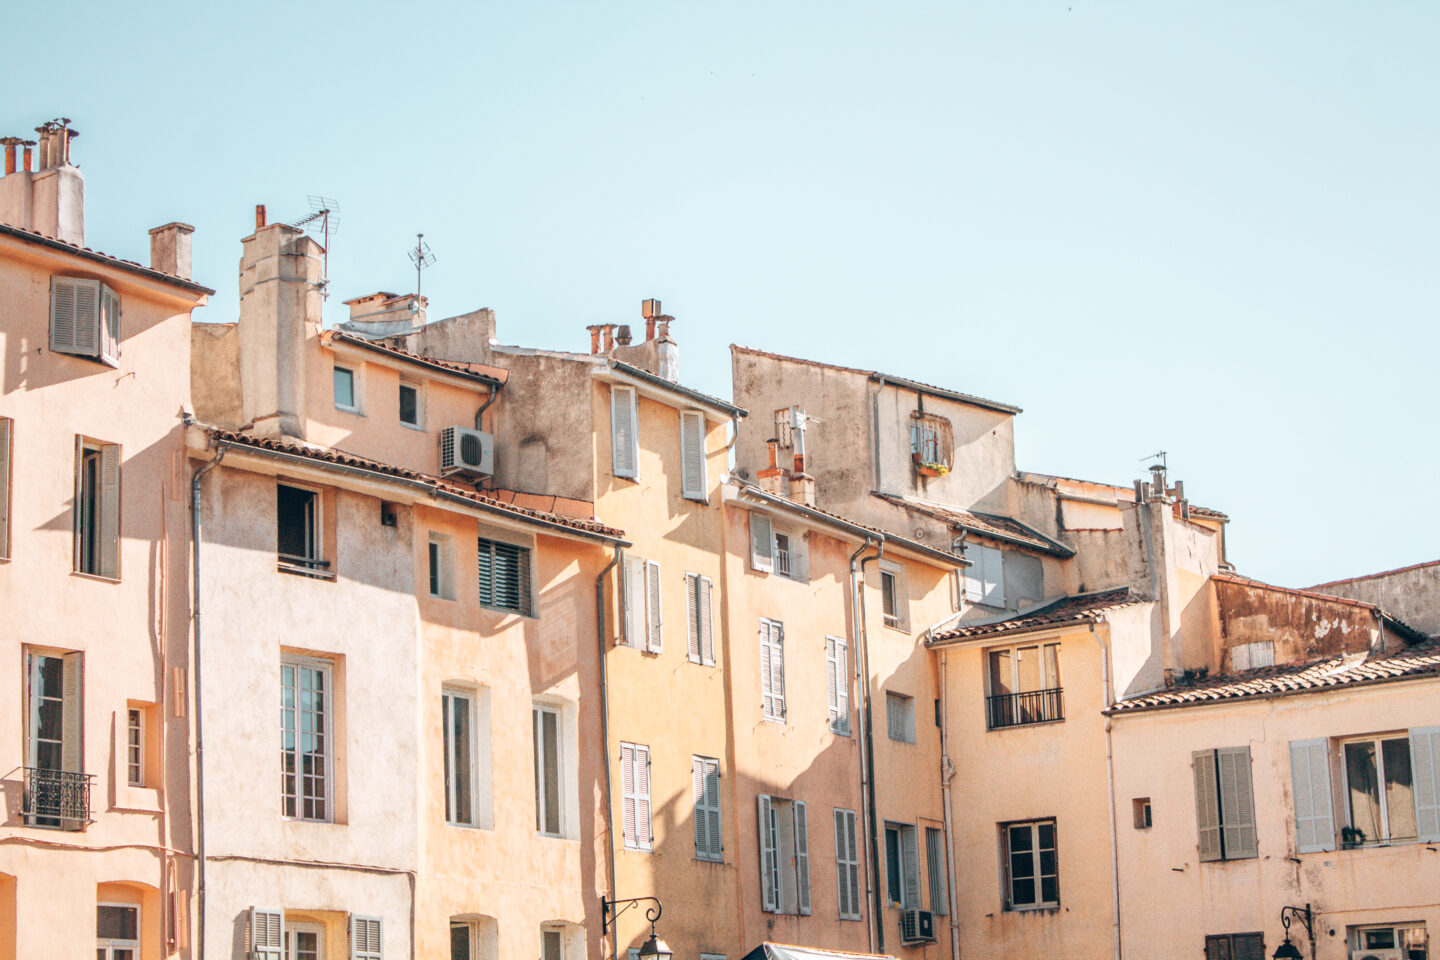 the charming colours and rooftops of Aix-en-Provence, France